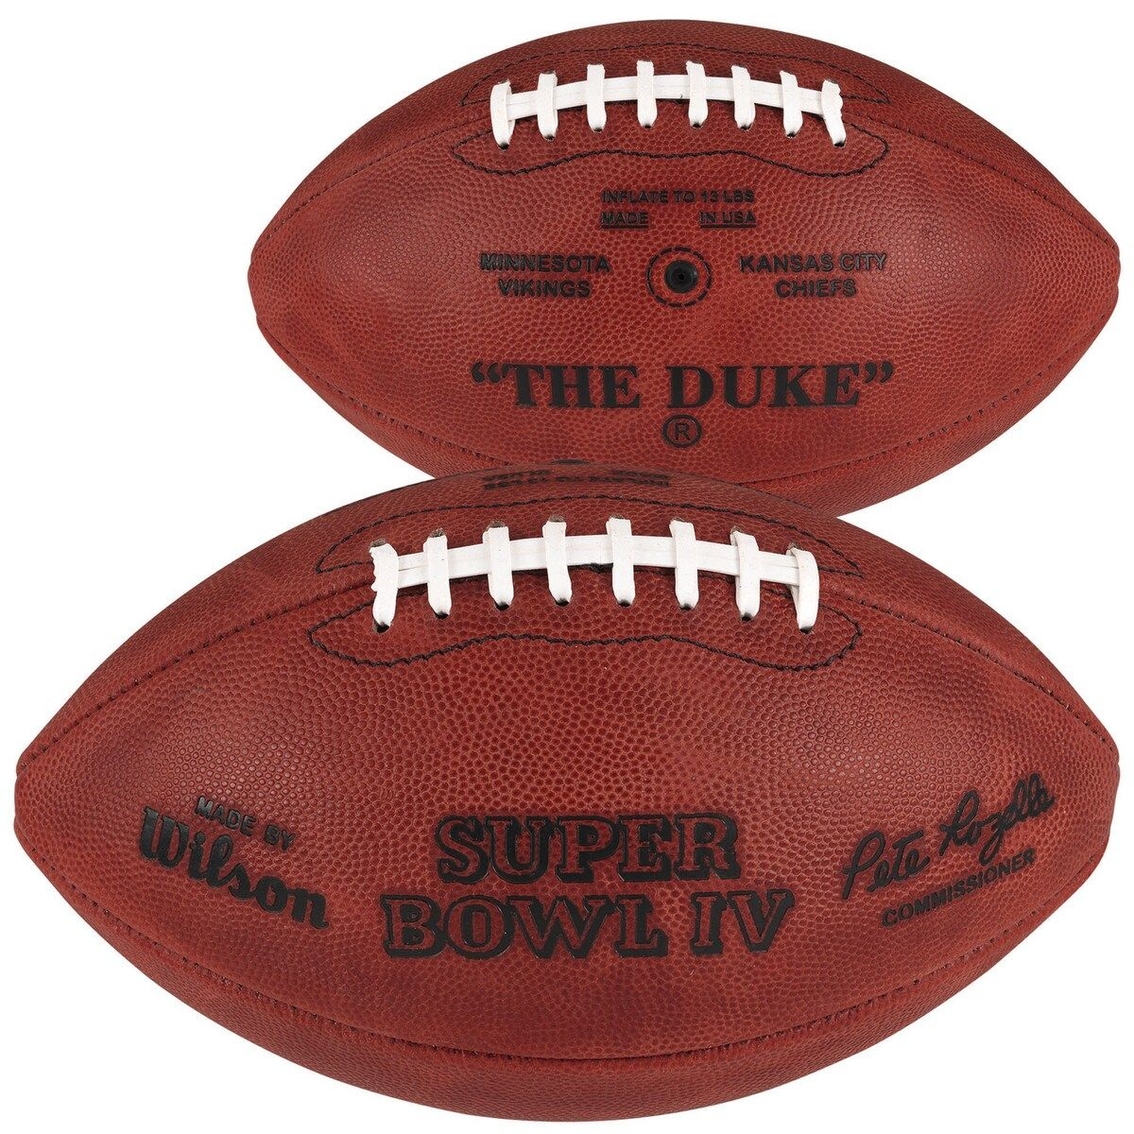 Wilson Super Bowl IV Wilson Official Game Football - Image 1 of 2